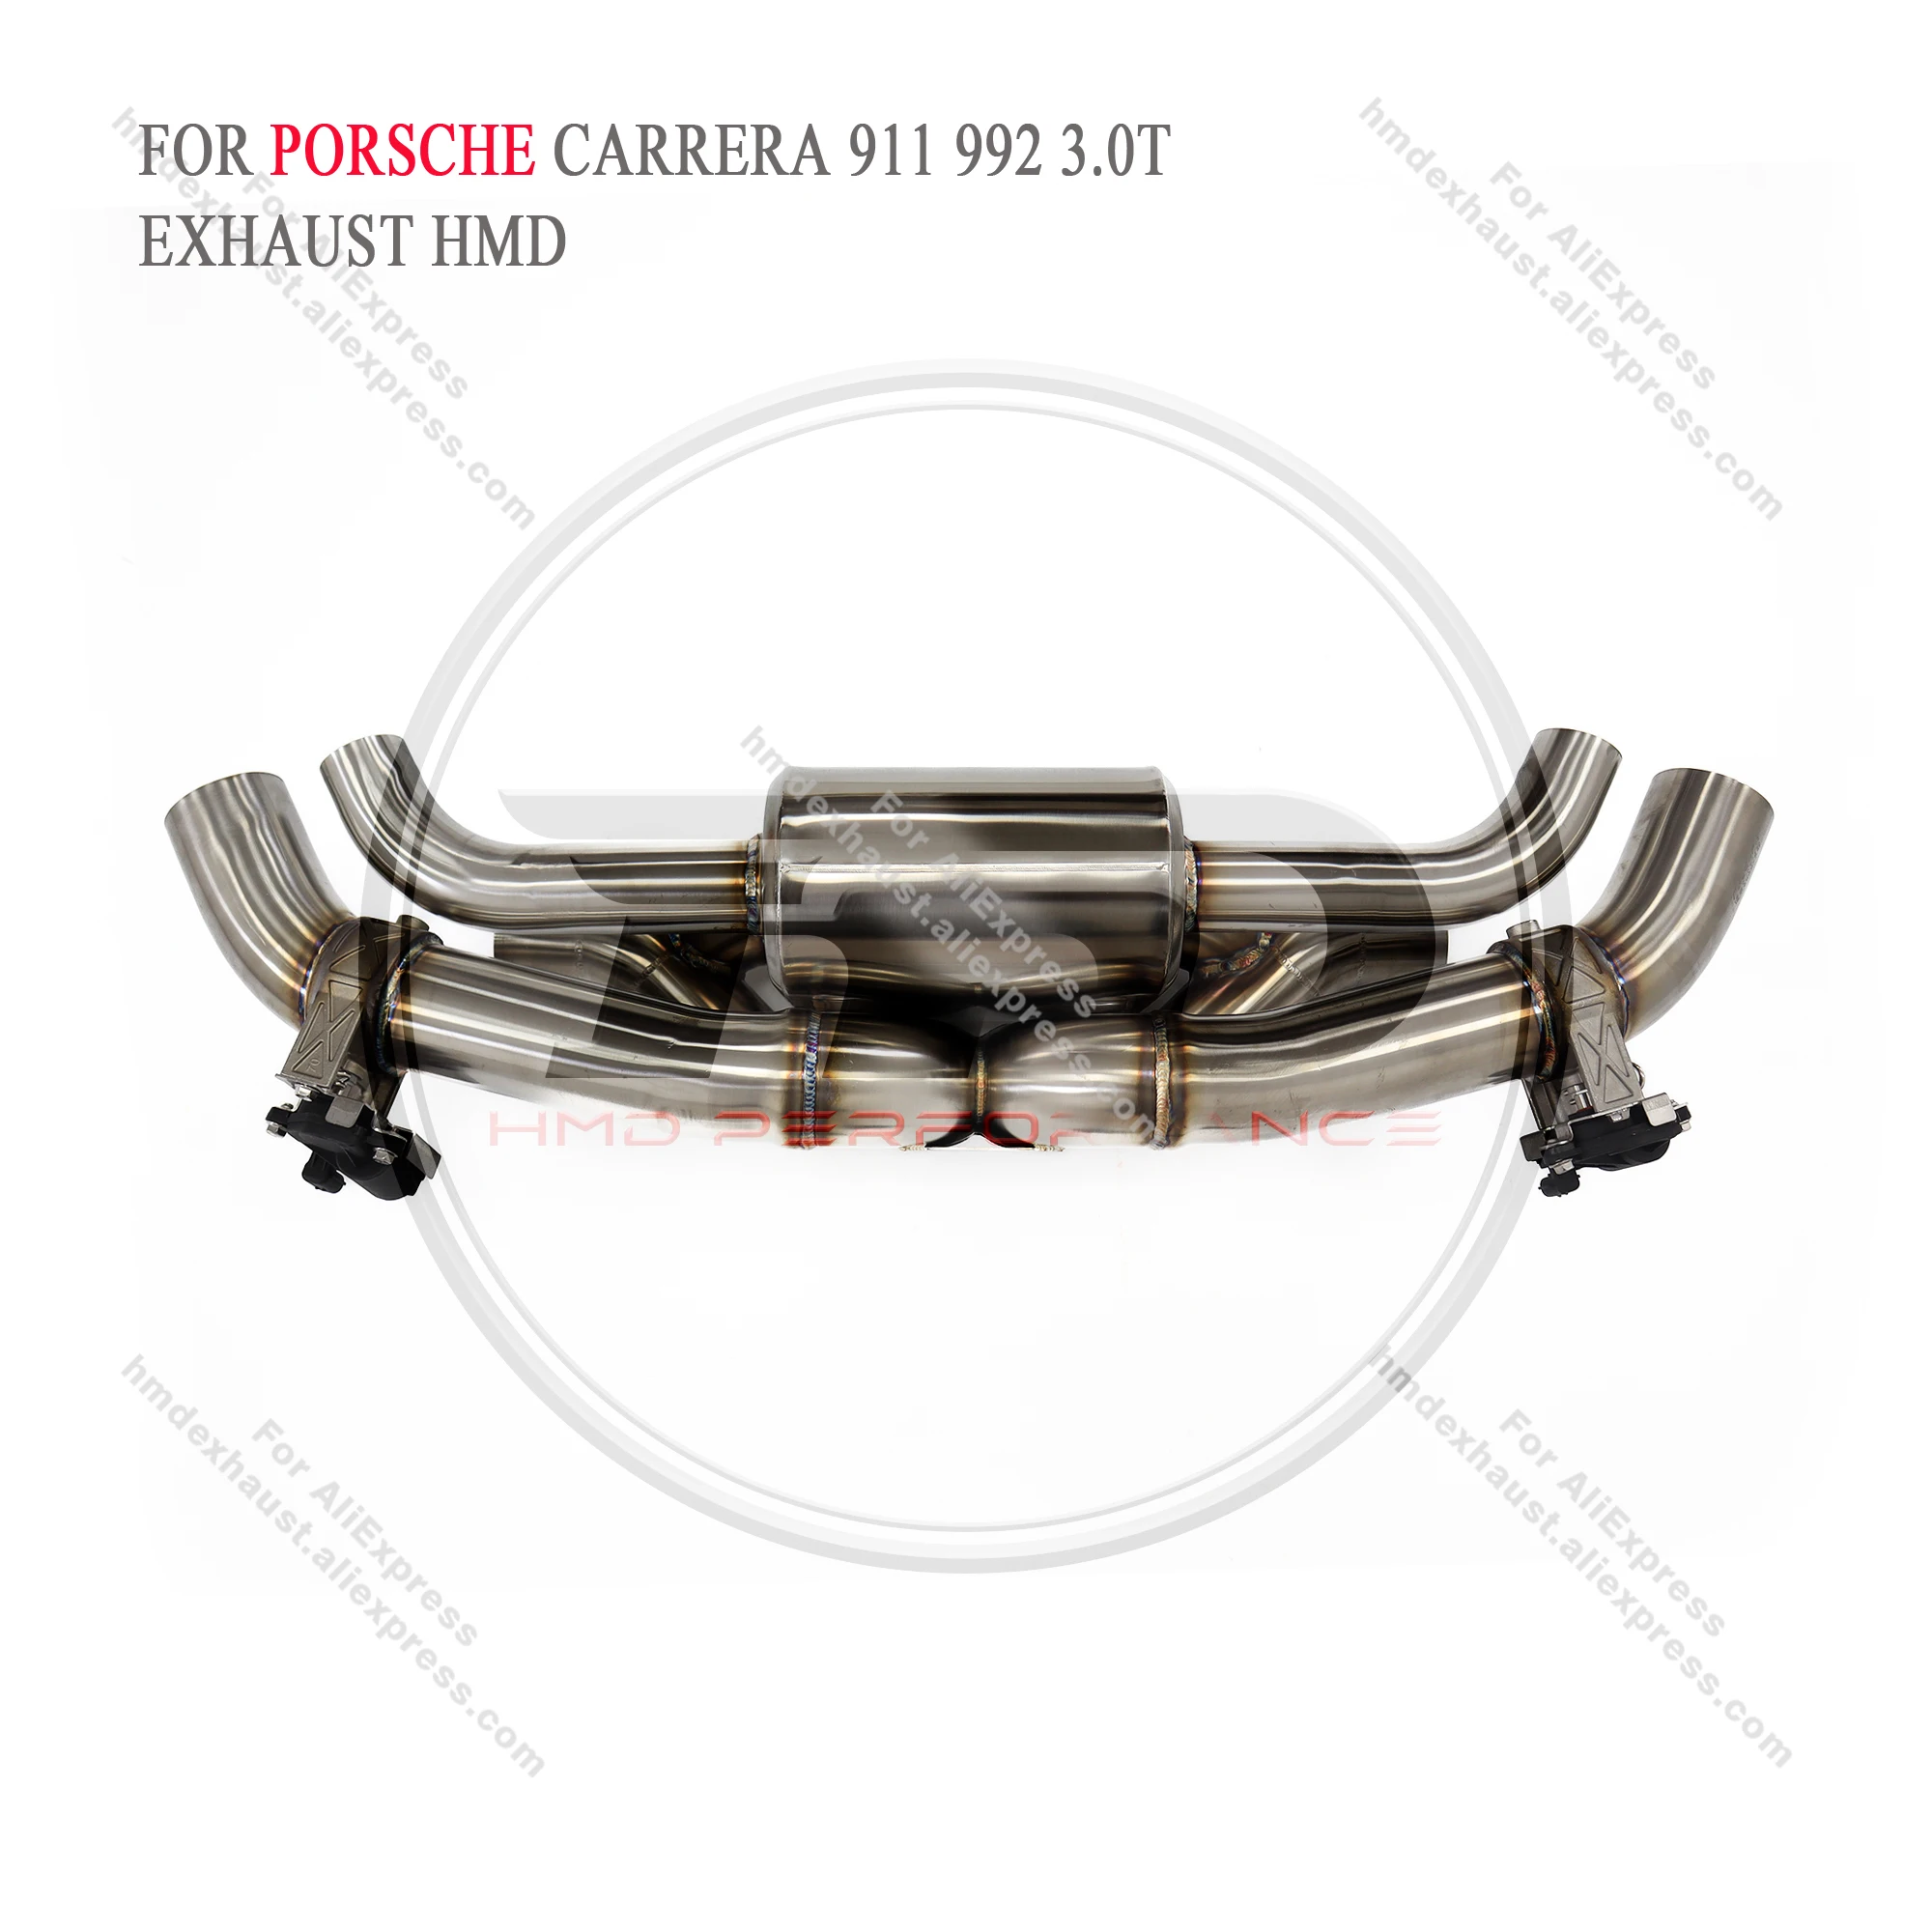 

HMD Exhaust System Stainless Steel Performance Catback for Porsche 911 992 Carrera 3.0T Muffler With Valve